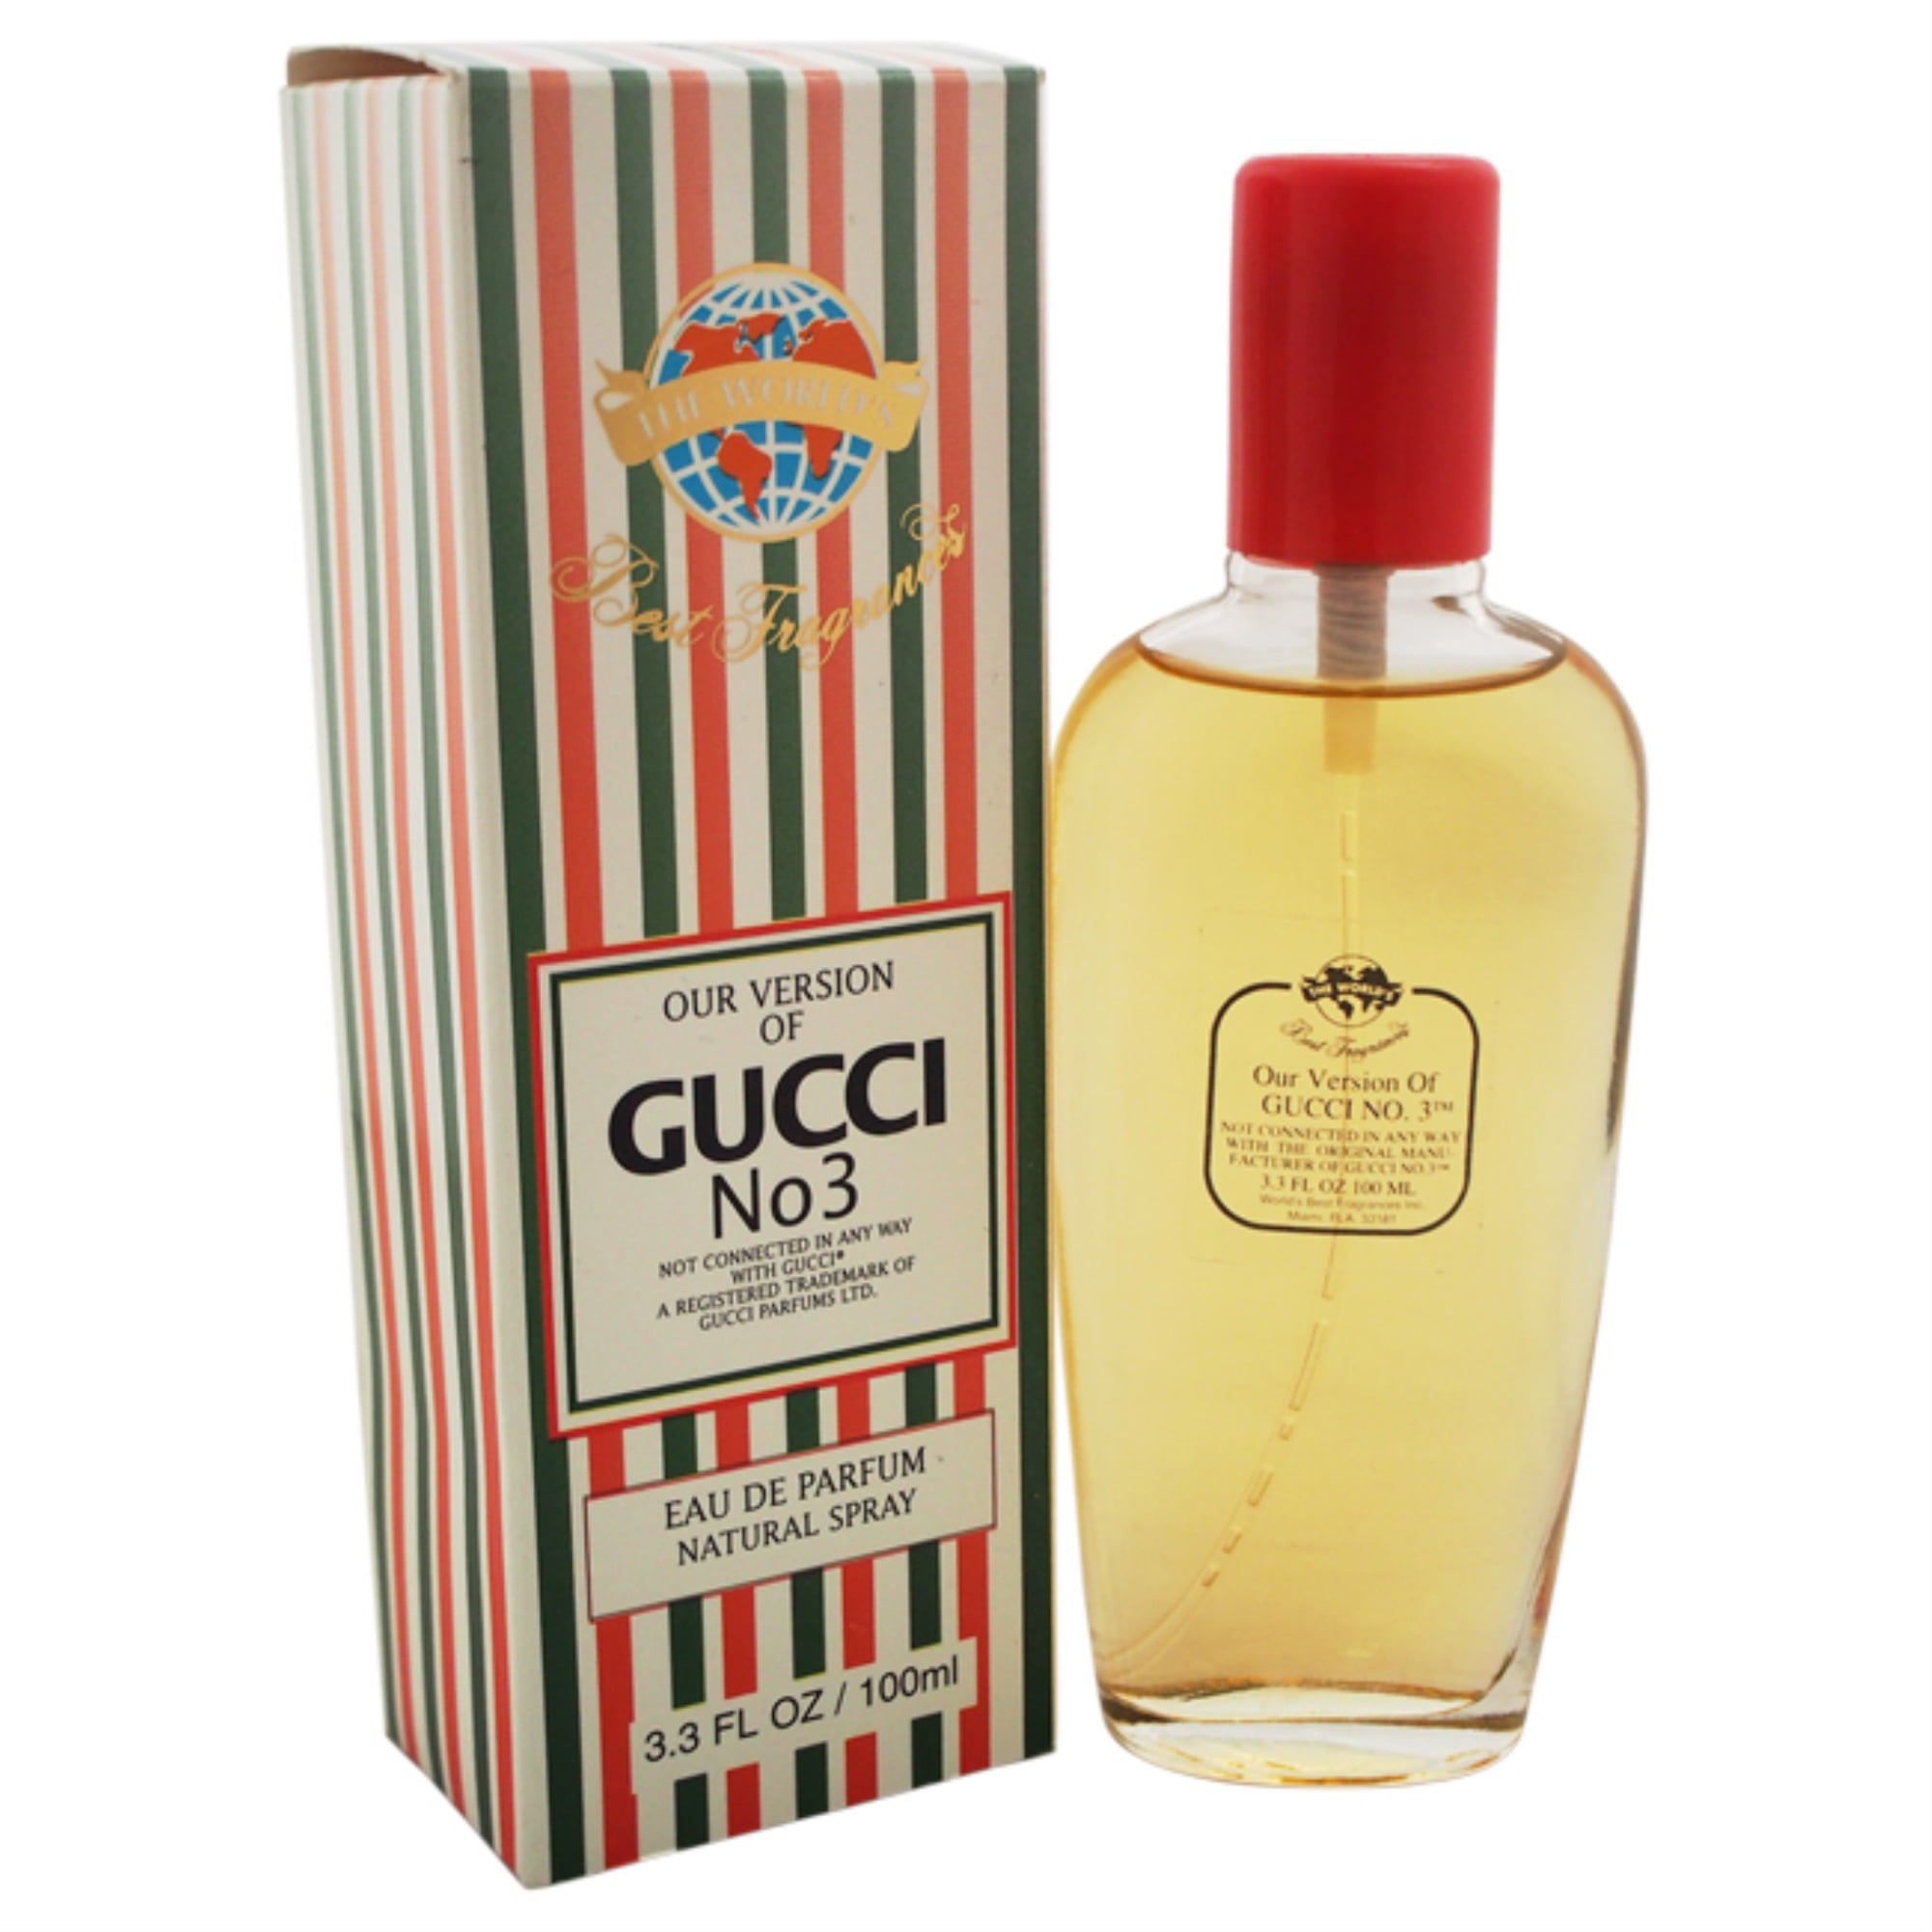 Our Version of Gucci No 3 by The Worlds Best Fragrances for Women  oz  EDP Spray 